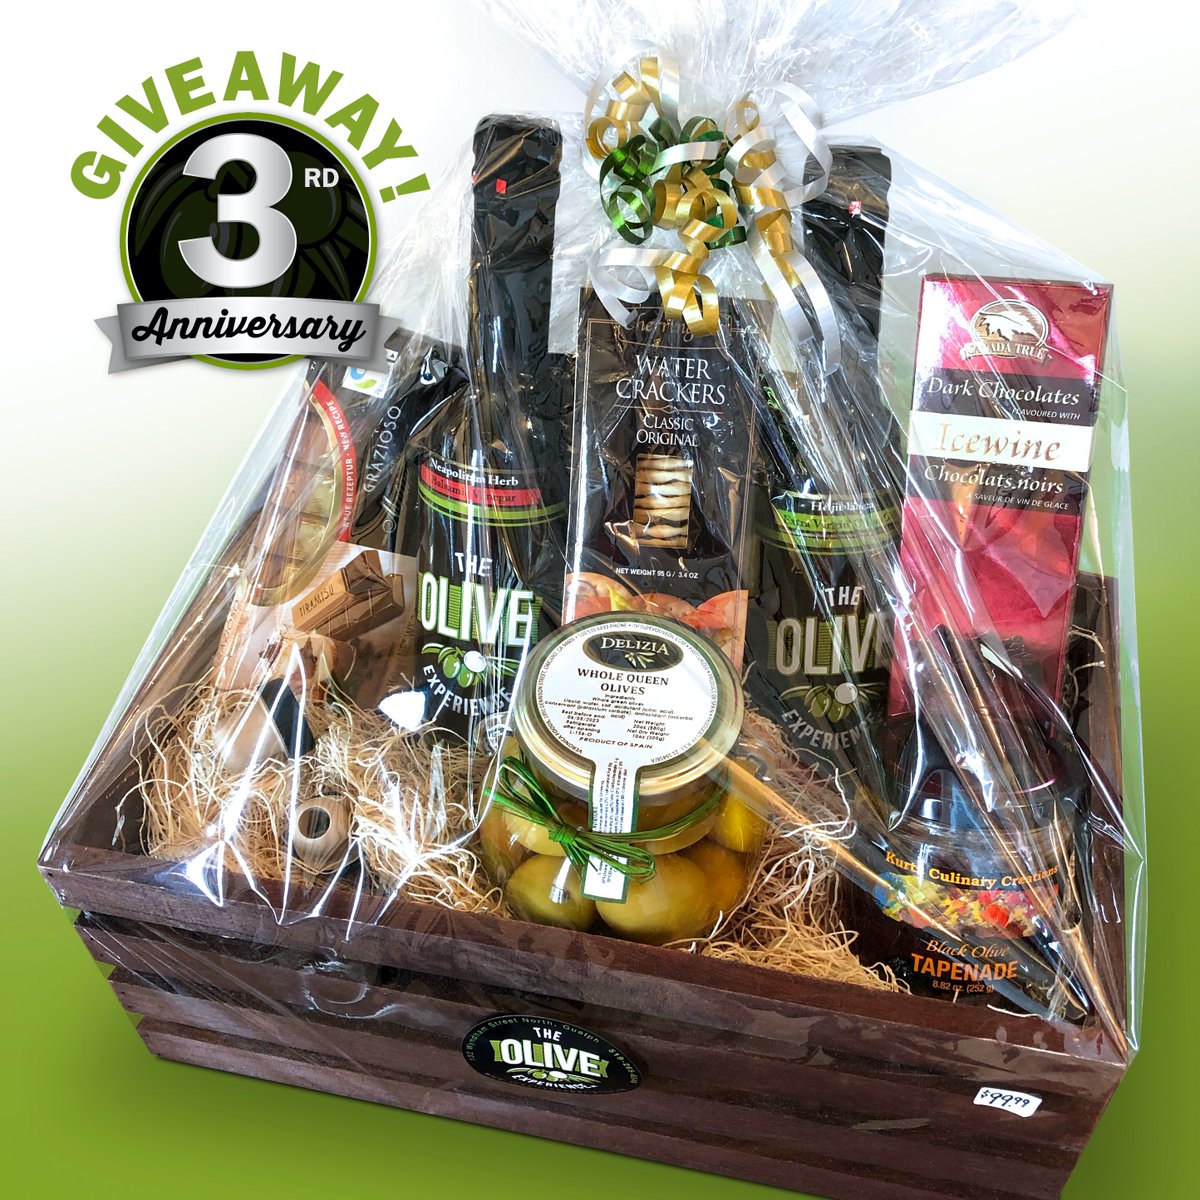 OUR 3rd ANNIVERSARY GIVEAWAY! To celebrate our 3rd Anniversary, we will be giving away this incredible gift basket, worth $99, to one lucky winner!